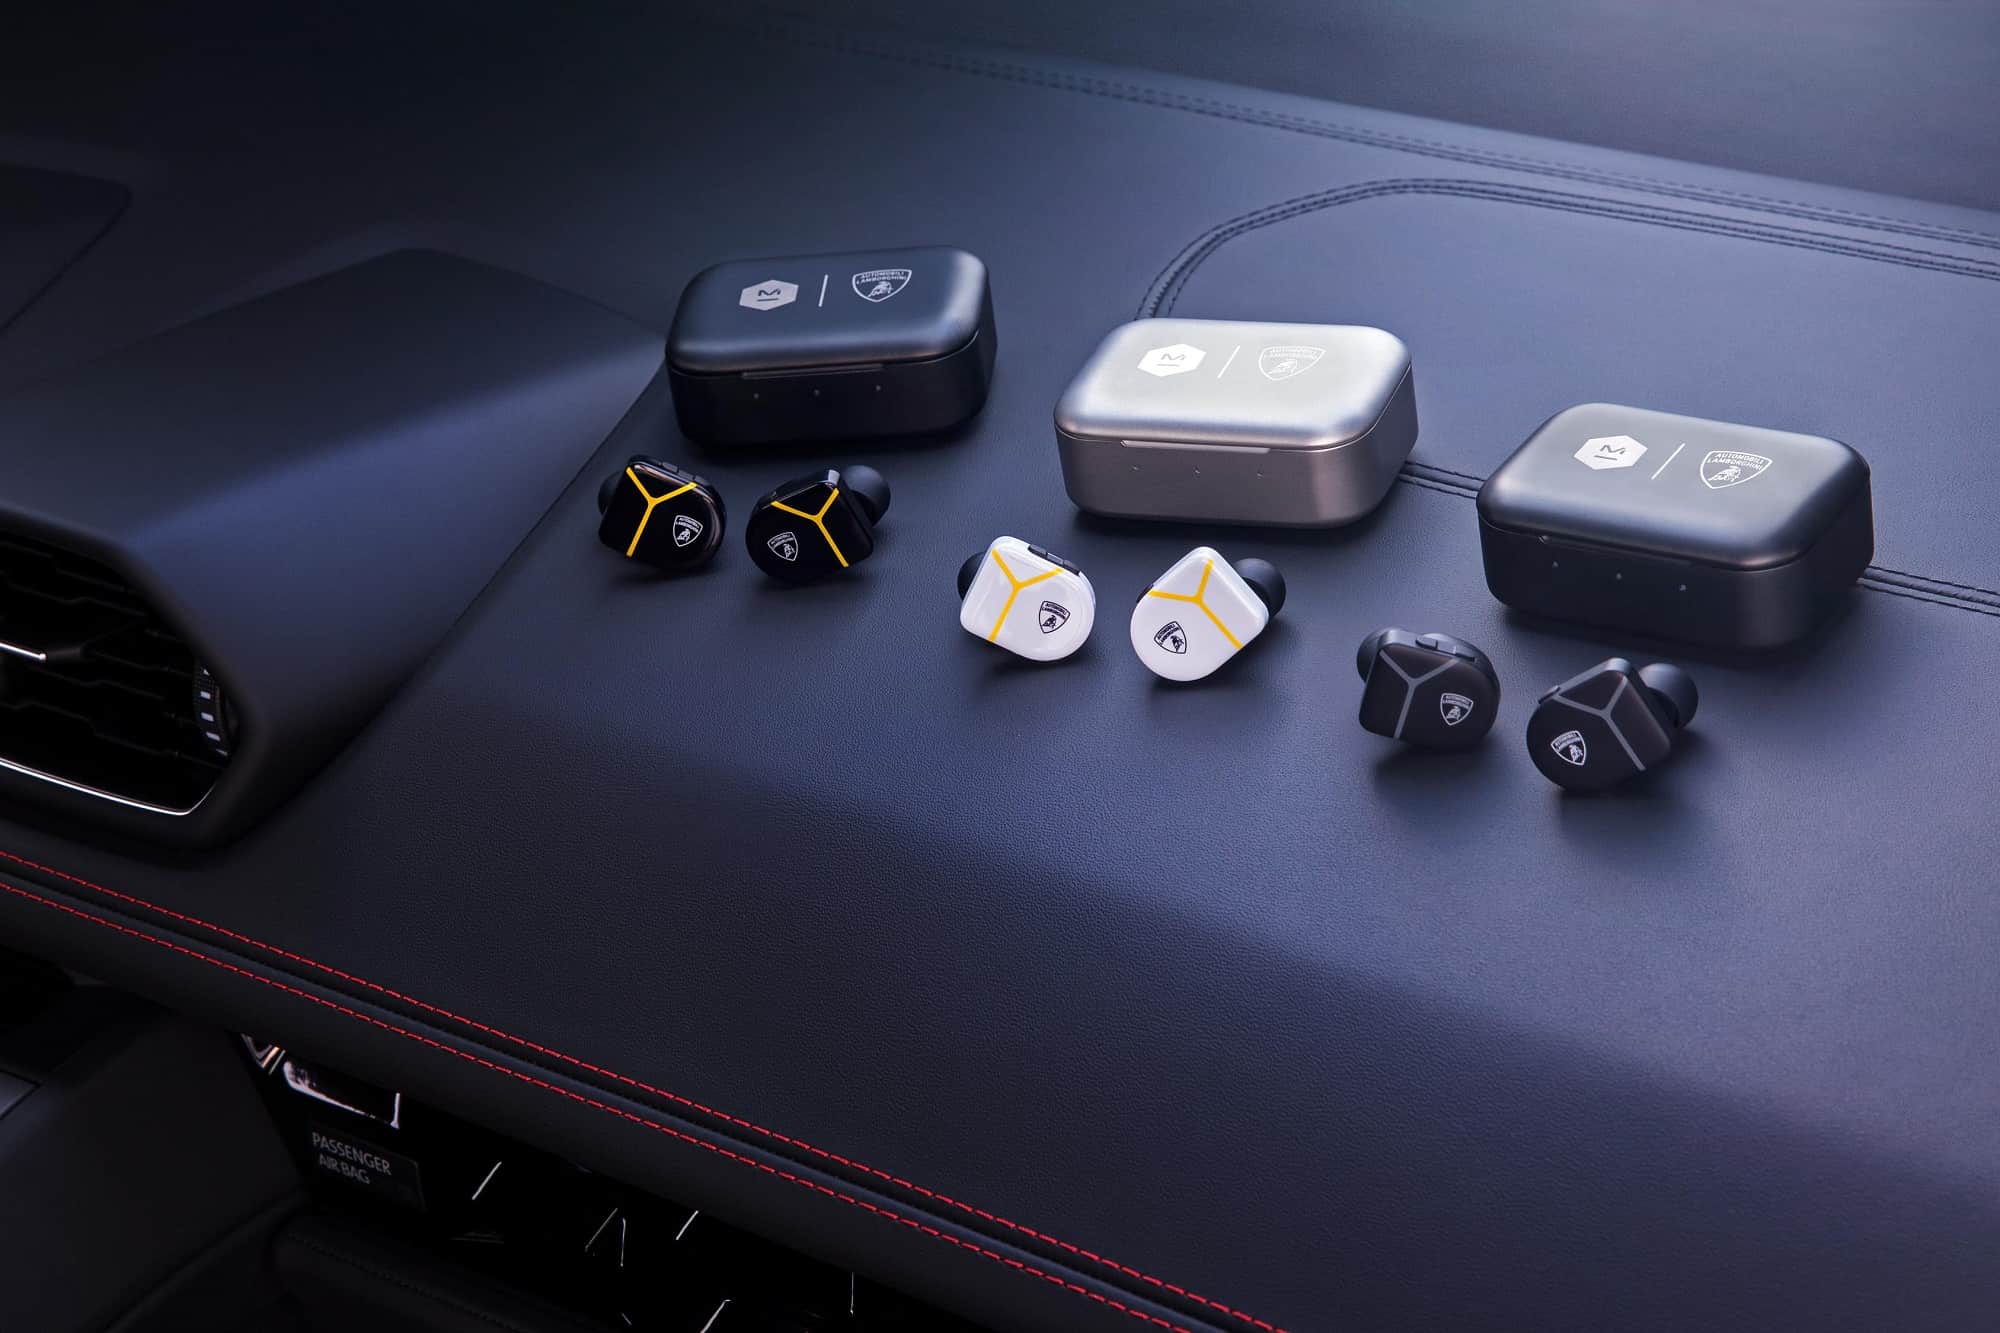 Automobili Lamborghini partners with Master & Dynamic on new headphones and earphones collection